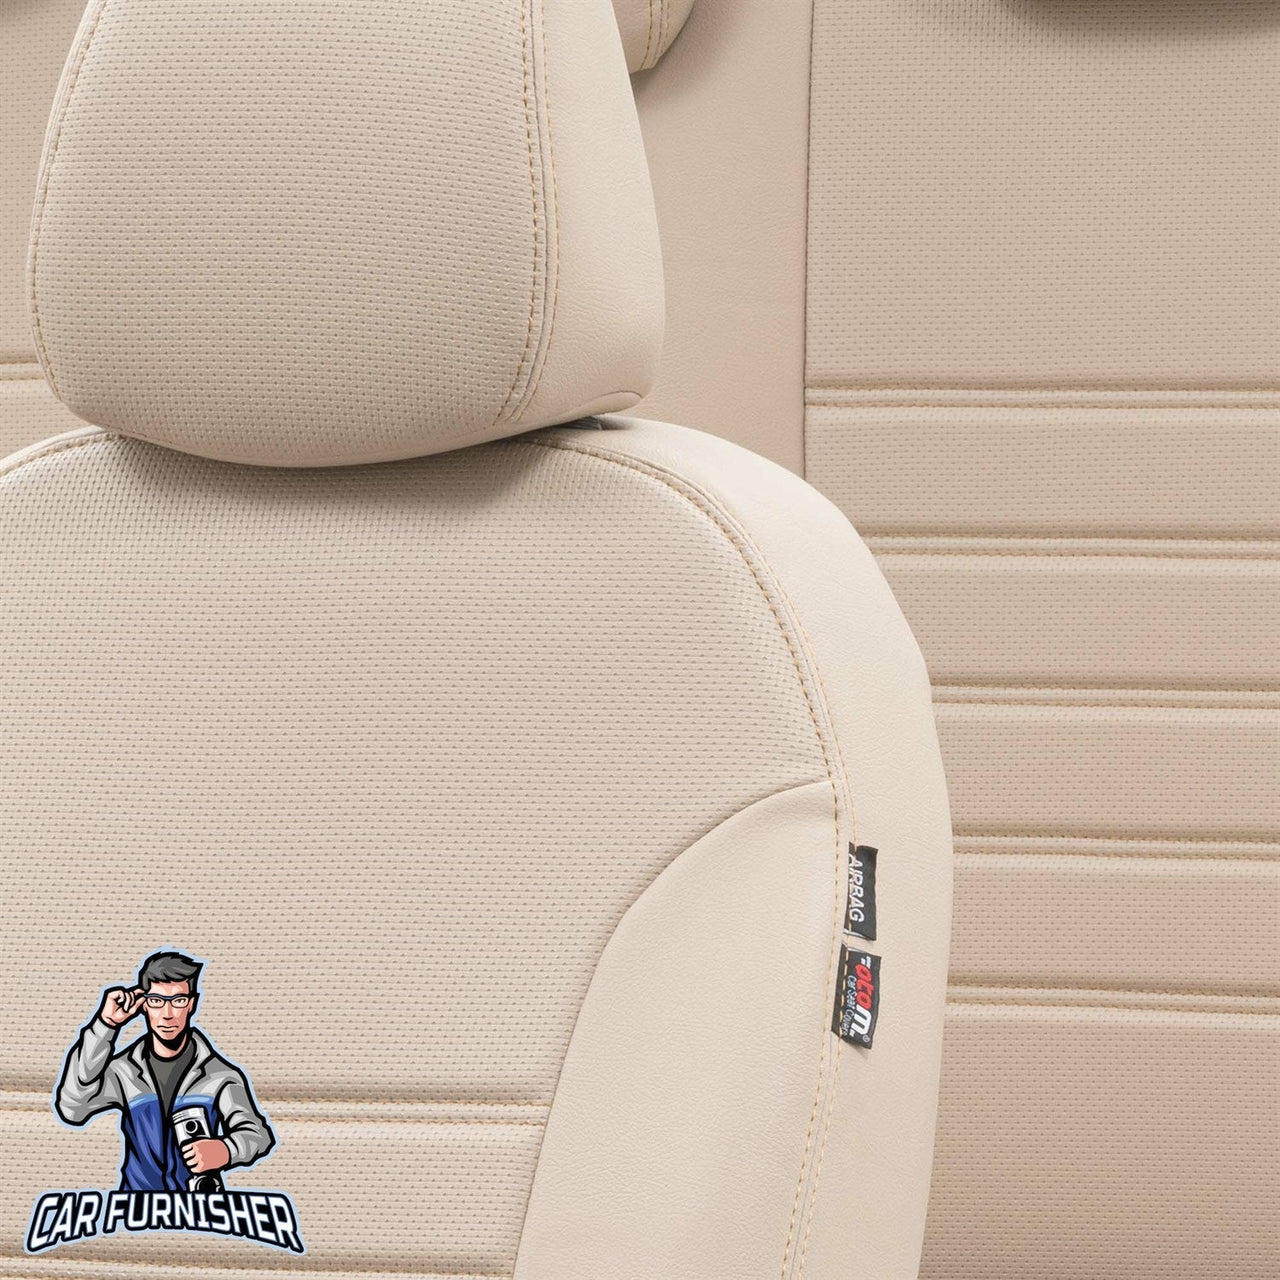 Toyota Land Cruiser Seat Cover New York Leather Design Beige Leather